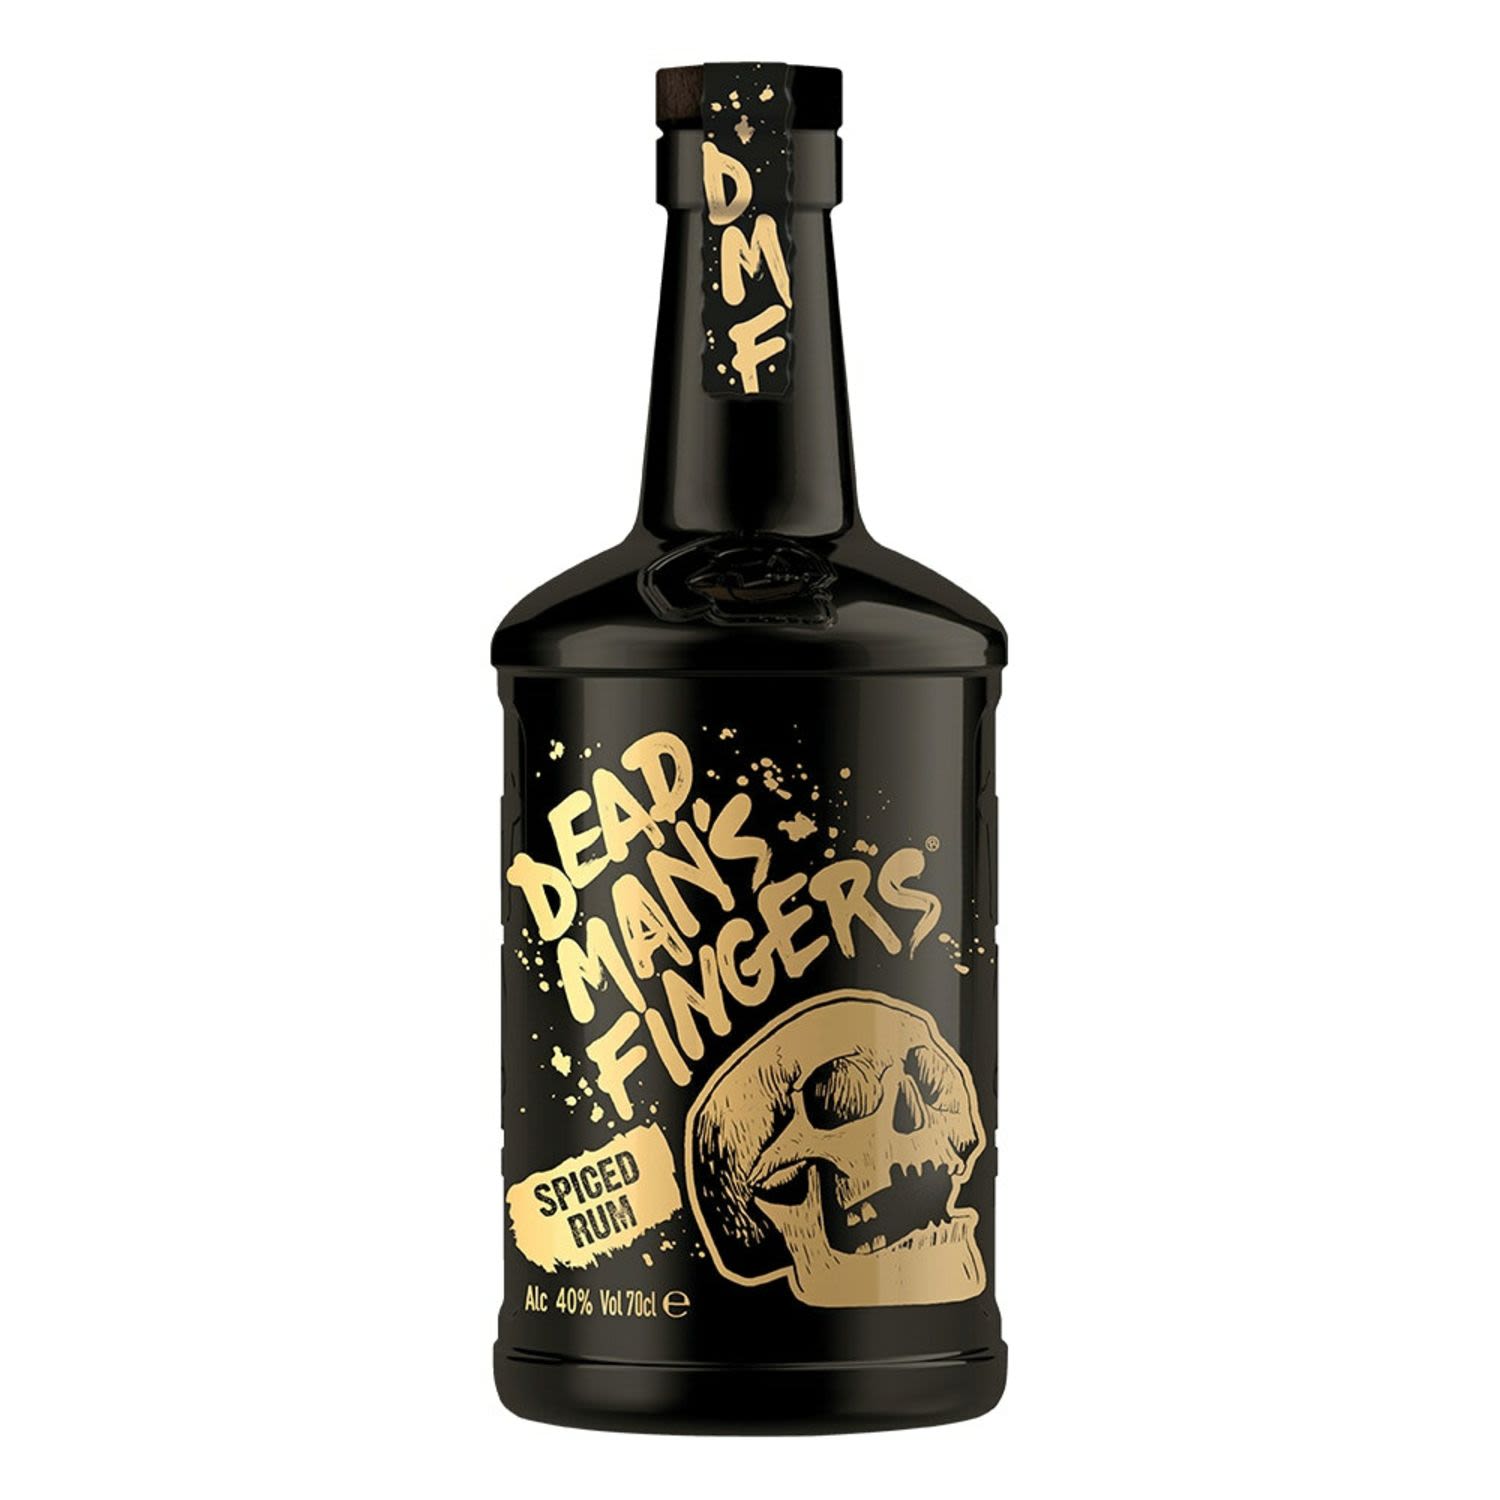 This Spiced Rum from Dead Man's Fingers is also suitable for Vegans. Where a blended rum meets exotic spices to create a unique and distinctive flavour profile. Those familiar with Saffron cake will certainly find a hint of that alongside notes of Pedro Ximénez Ice cream. Next comes a whisper of creamy caramel followed by vanilla, cinnamon, nutmeg and of course, those subtly sweet undertones of orange. Some have even found notes of pineapple, dried raisins and a pinch of black pepper – but we think they’re just showing off.<br /> <br />Alcohol Volume: 40.00%<br /><br />Pack Format: Bottle<br /><br />Standard Drinks: 22.1<br /><br />Pack Type: Bottle<br /><br />Country of Origin: United Kingdom<br />